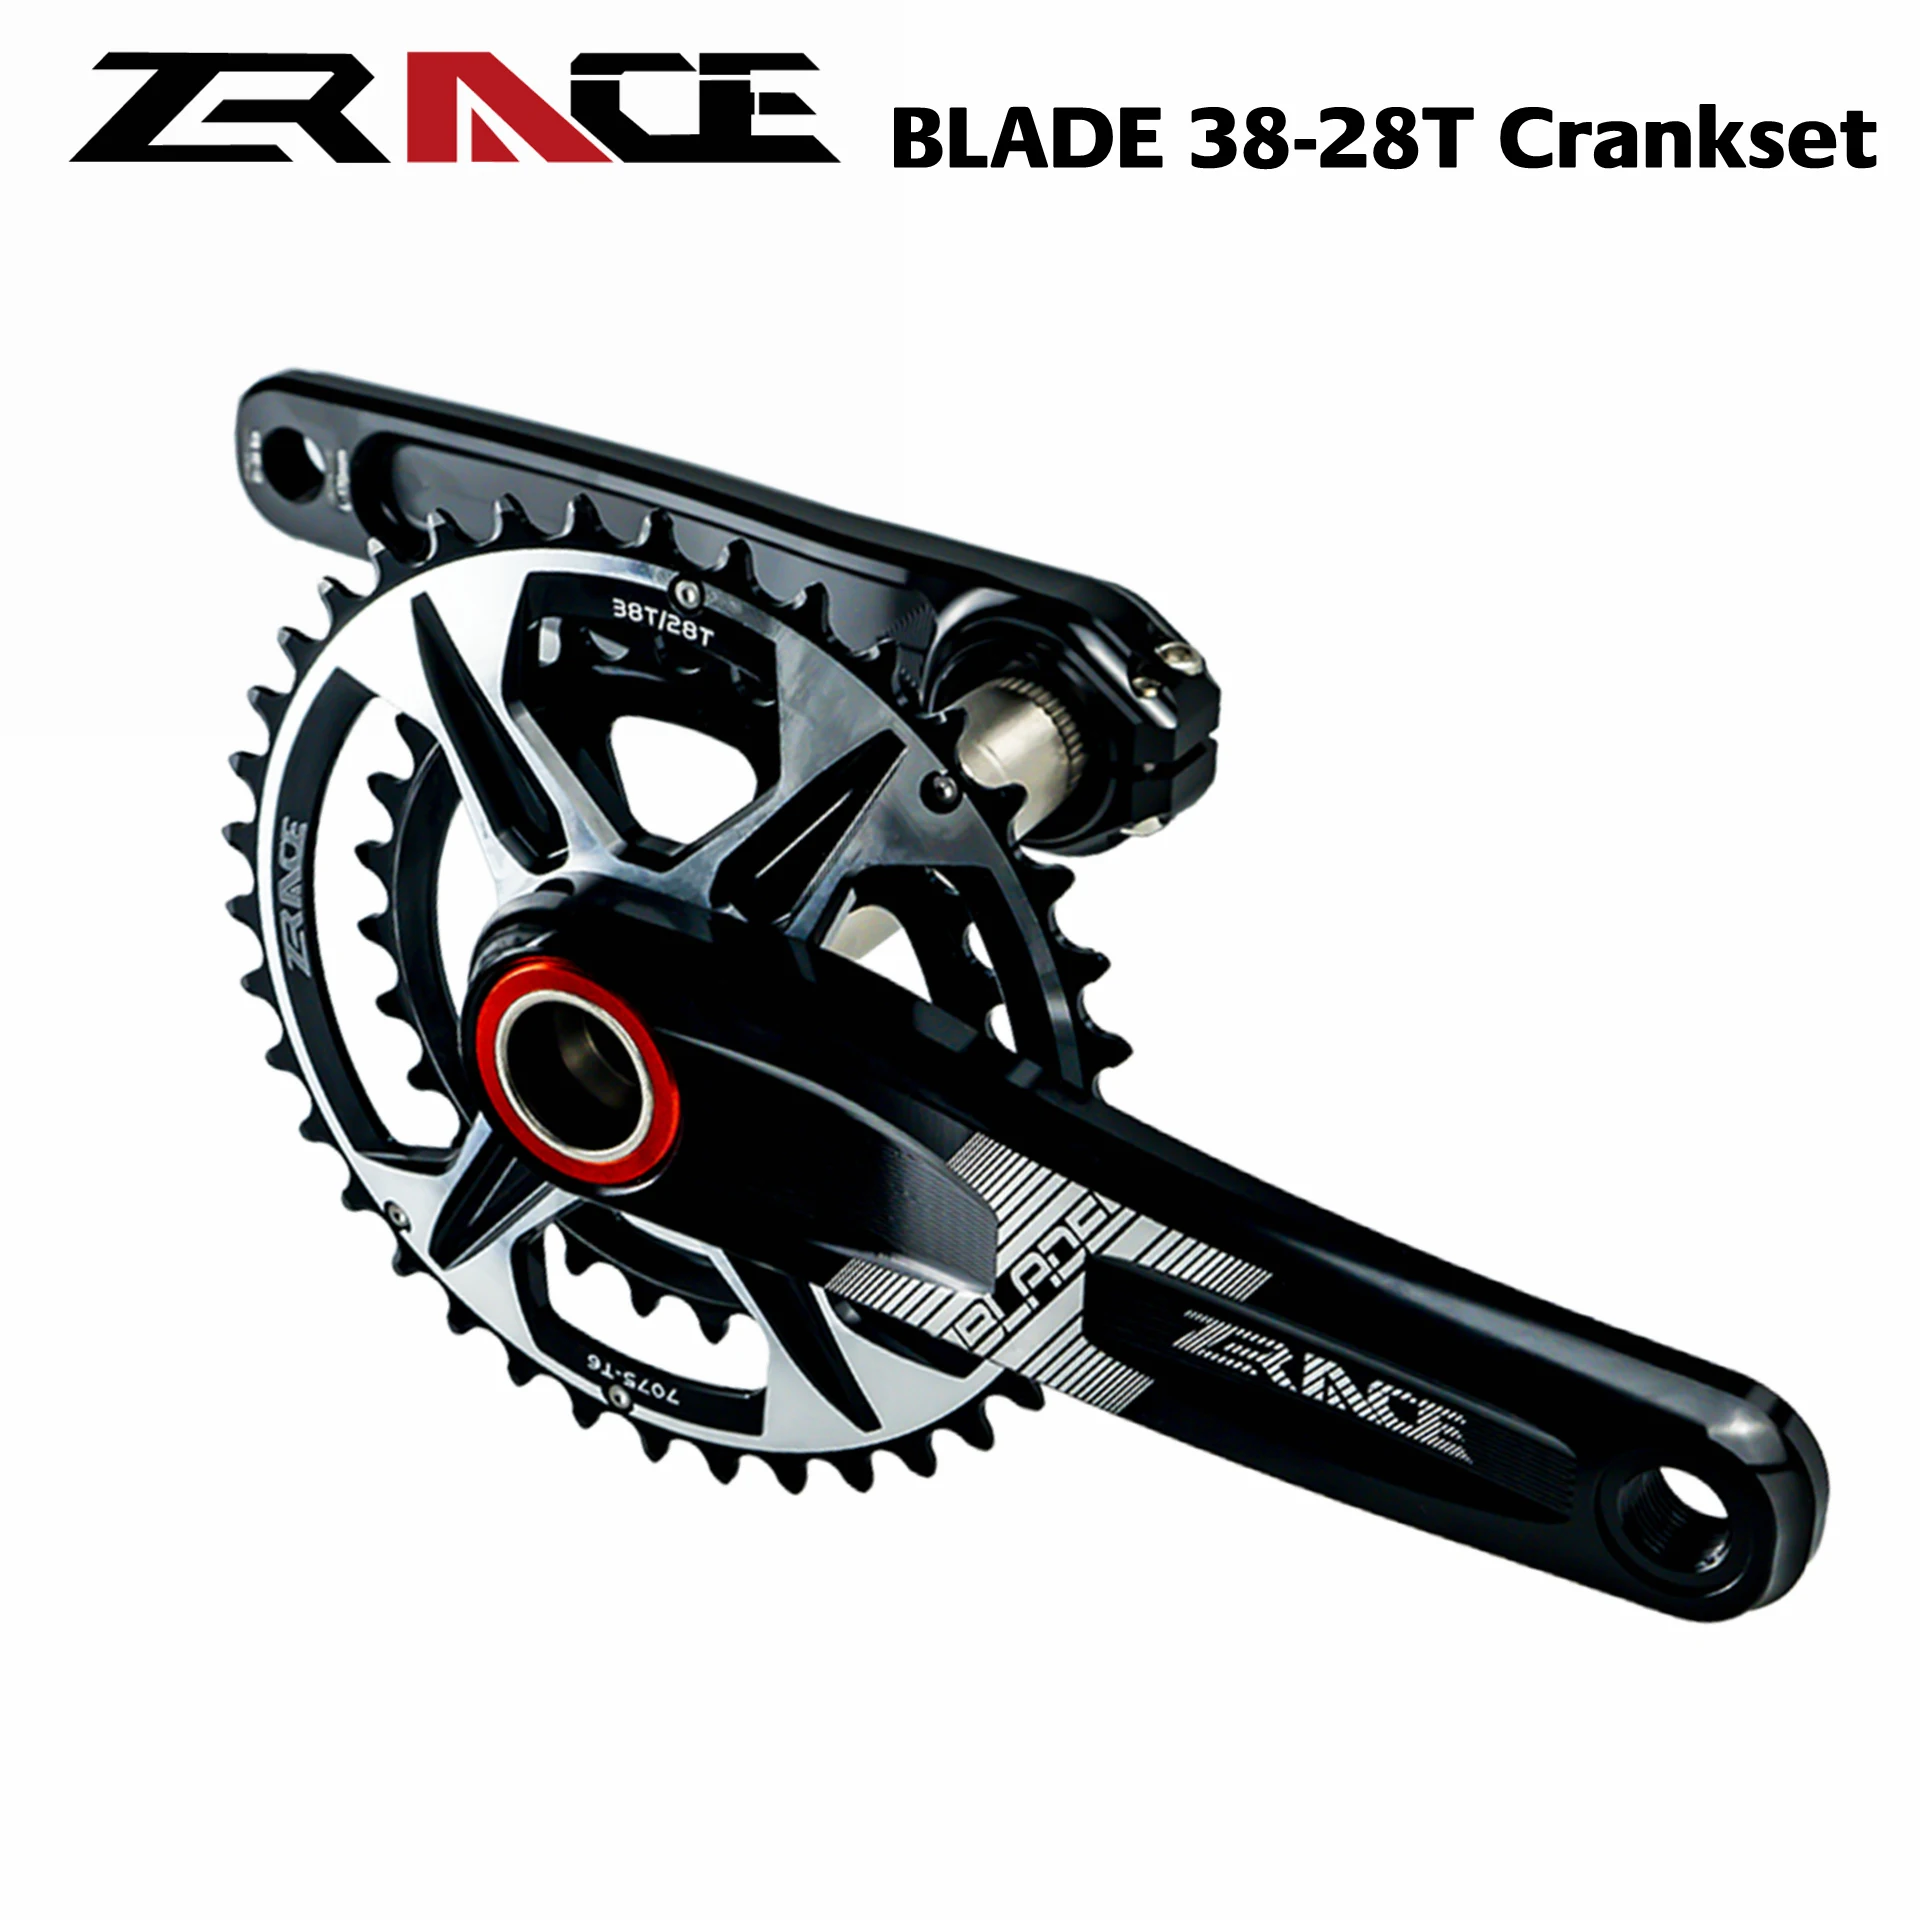 ZRACE Cranksets BLADE 2 x 10  2x11 2x12 Speed Crankset Eagle Tooth for MTB XC / TR / AM 170 / 175mm,38-28T, BB68/73 Chainset